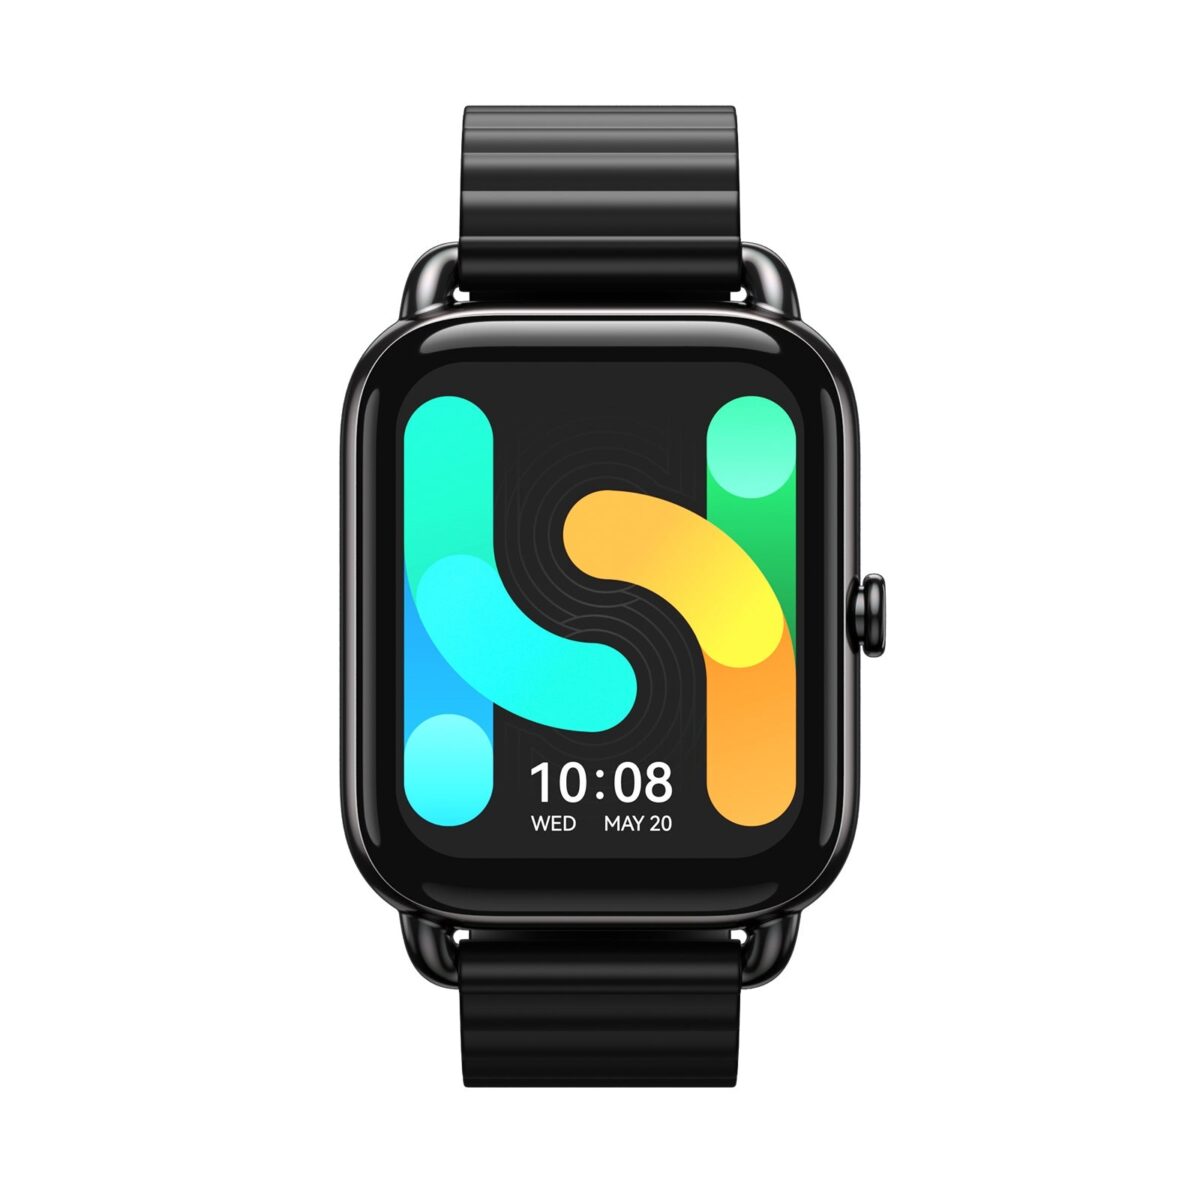 Haylou RS4 Plus Black -2 Straps (Silicon & Magnetic) Smart Watch 1,78 AMOLED 368x448 100 faces IP68 - HAYLOU 2.35.73.01.004